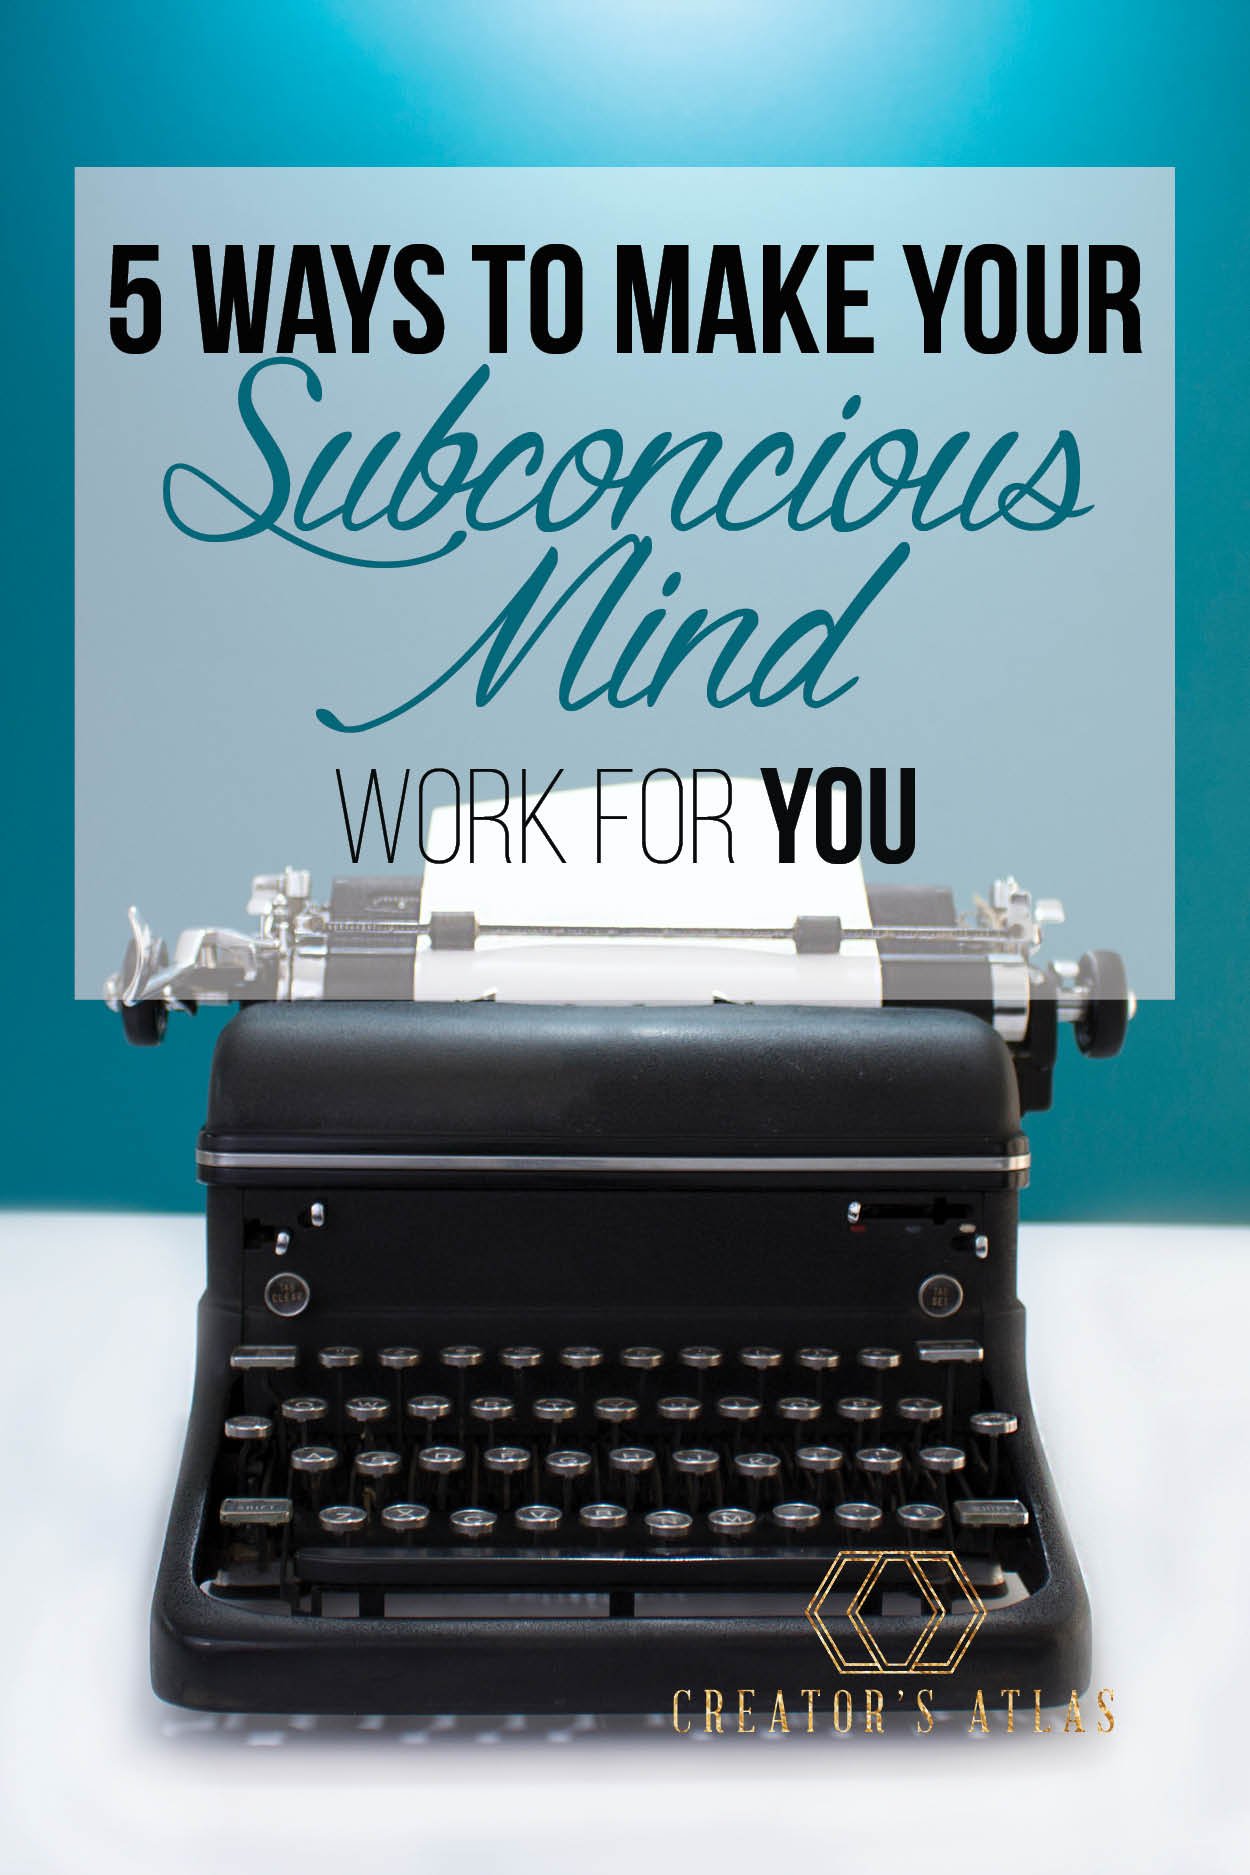 5 Ways to let make your subconscious work for you.